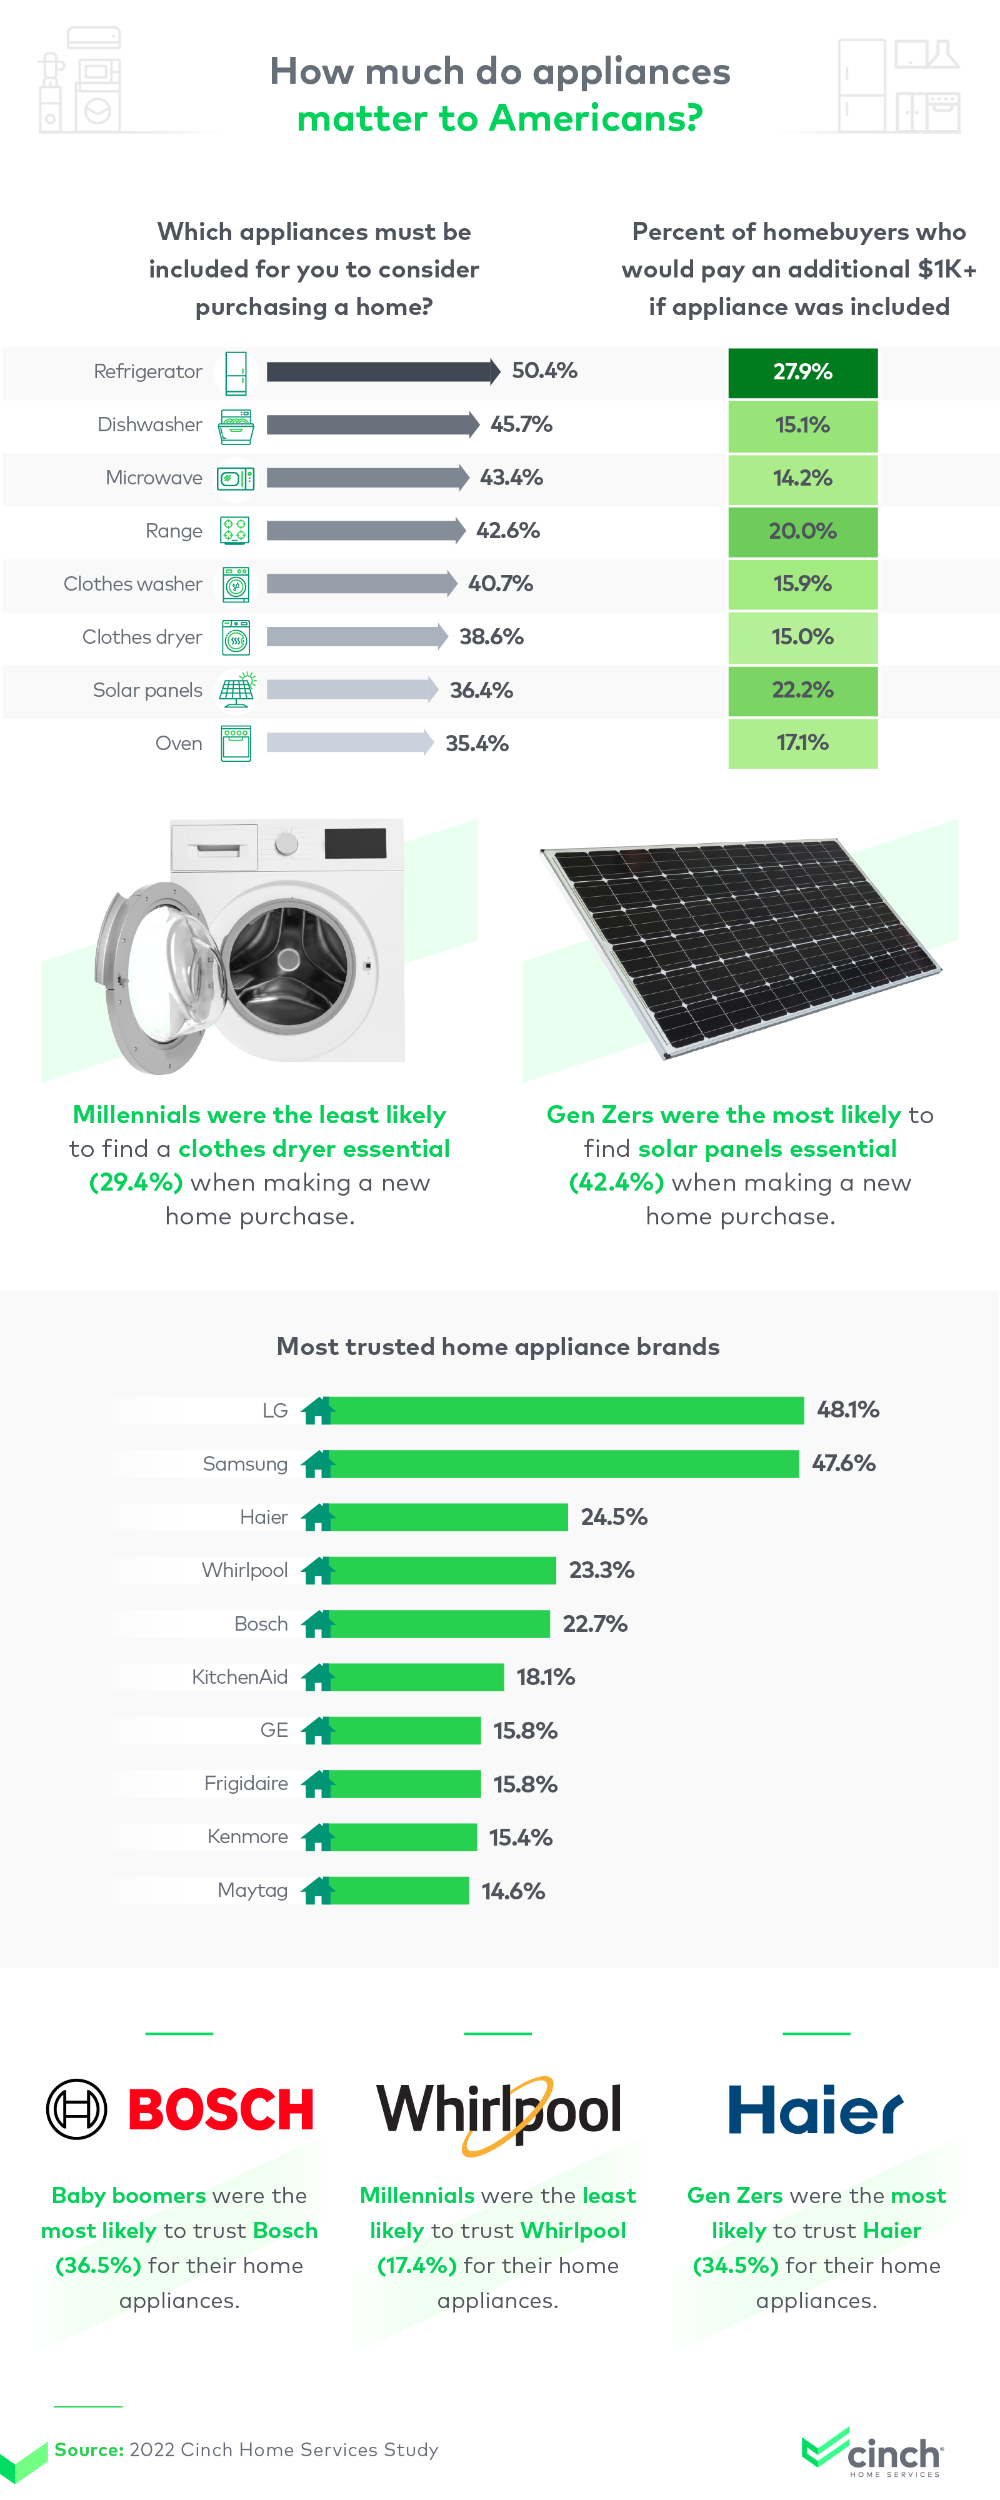 Infographic that explores how much do appliances matter to Americans and which appliance brands do Americans trust the most.